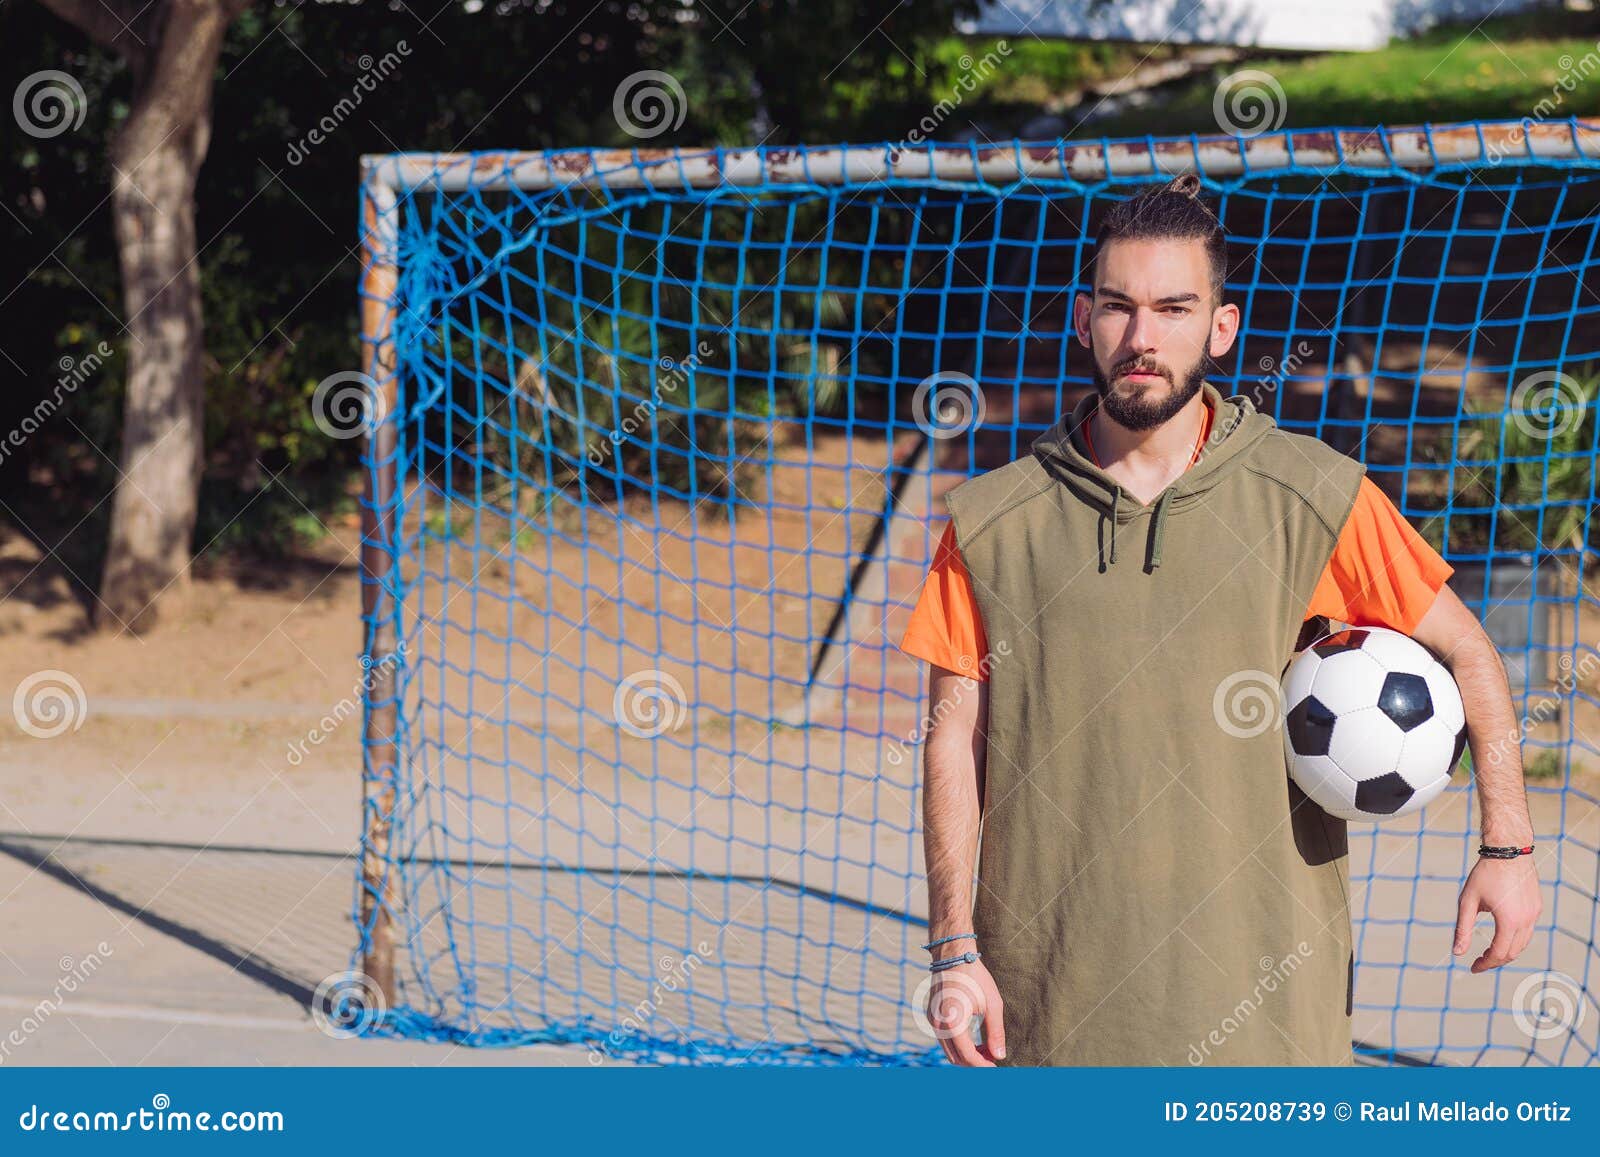 Soccer Player In Front Of The Goal With The Ball Stock Image Image Of Footballer Confidence